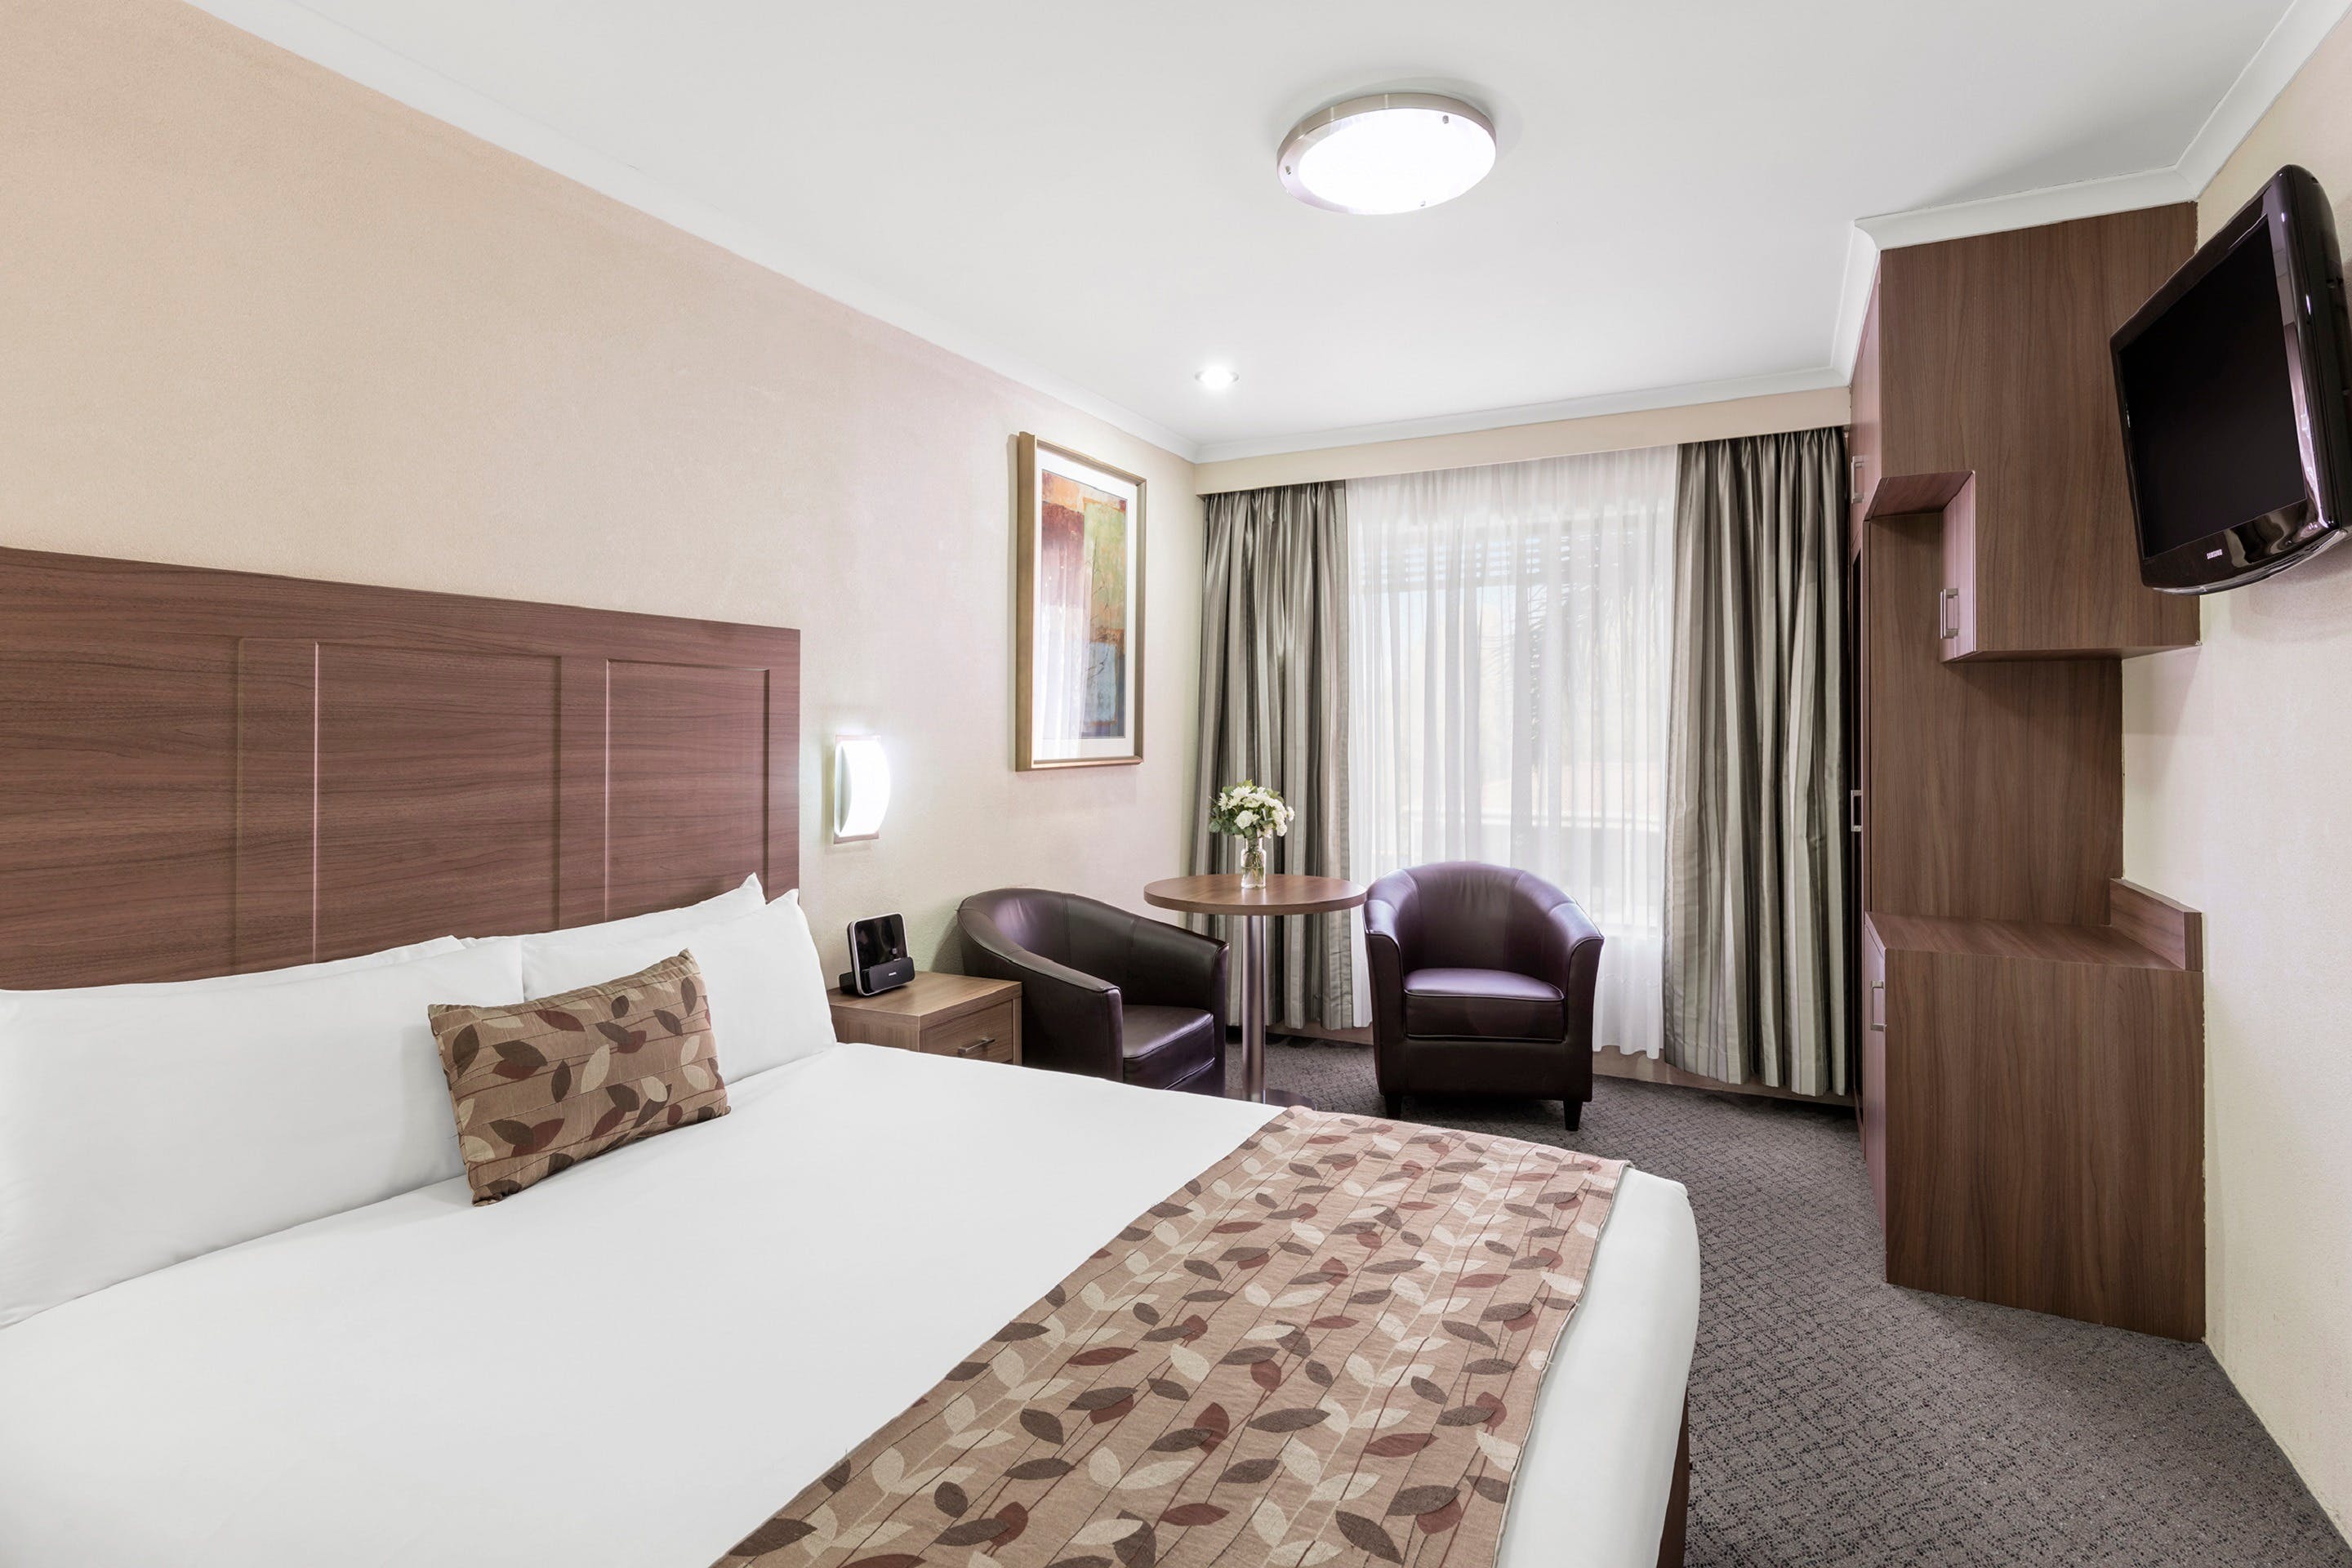 Garden City Hotel BW Signature Collection - Kempsey Accommodation